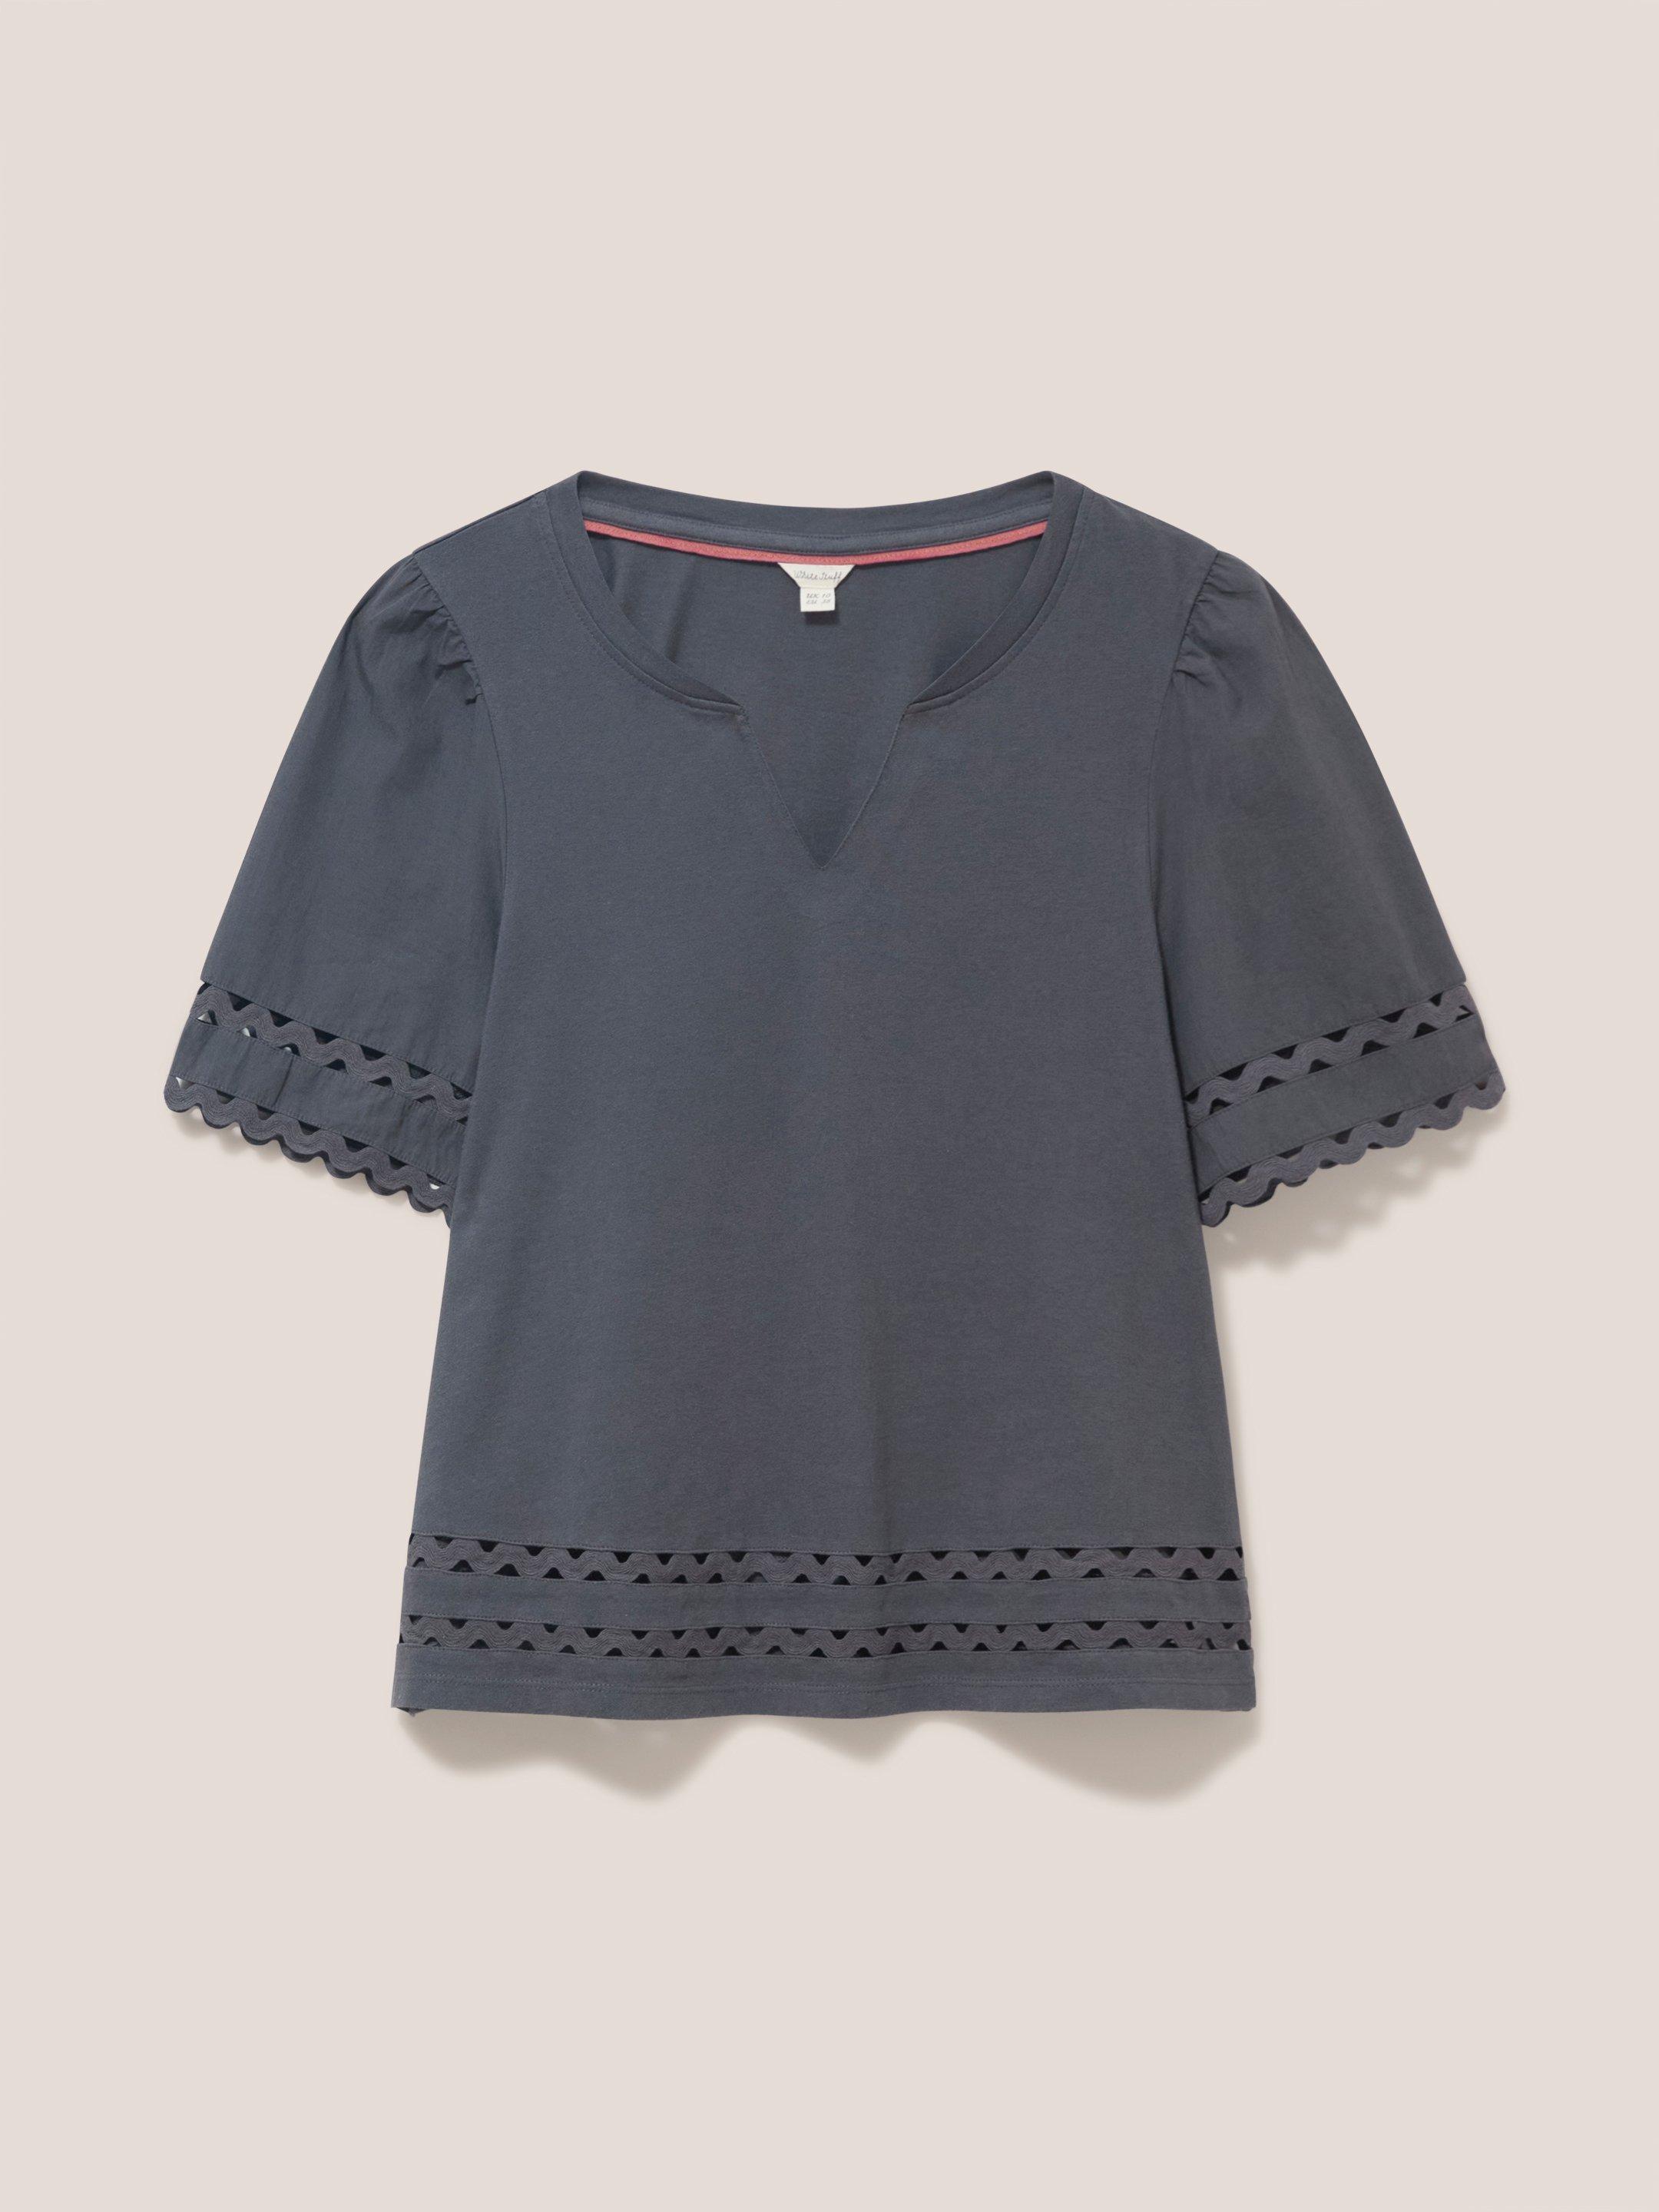 SAGE TRIM TOP in CHARC GREY - FLAT FRONT